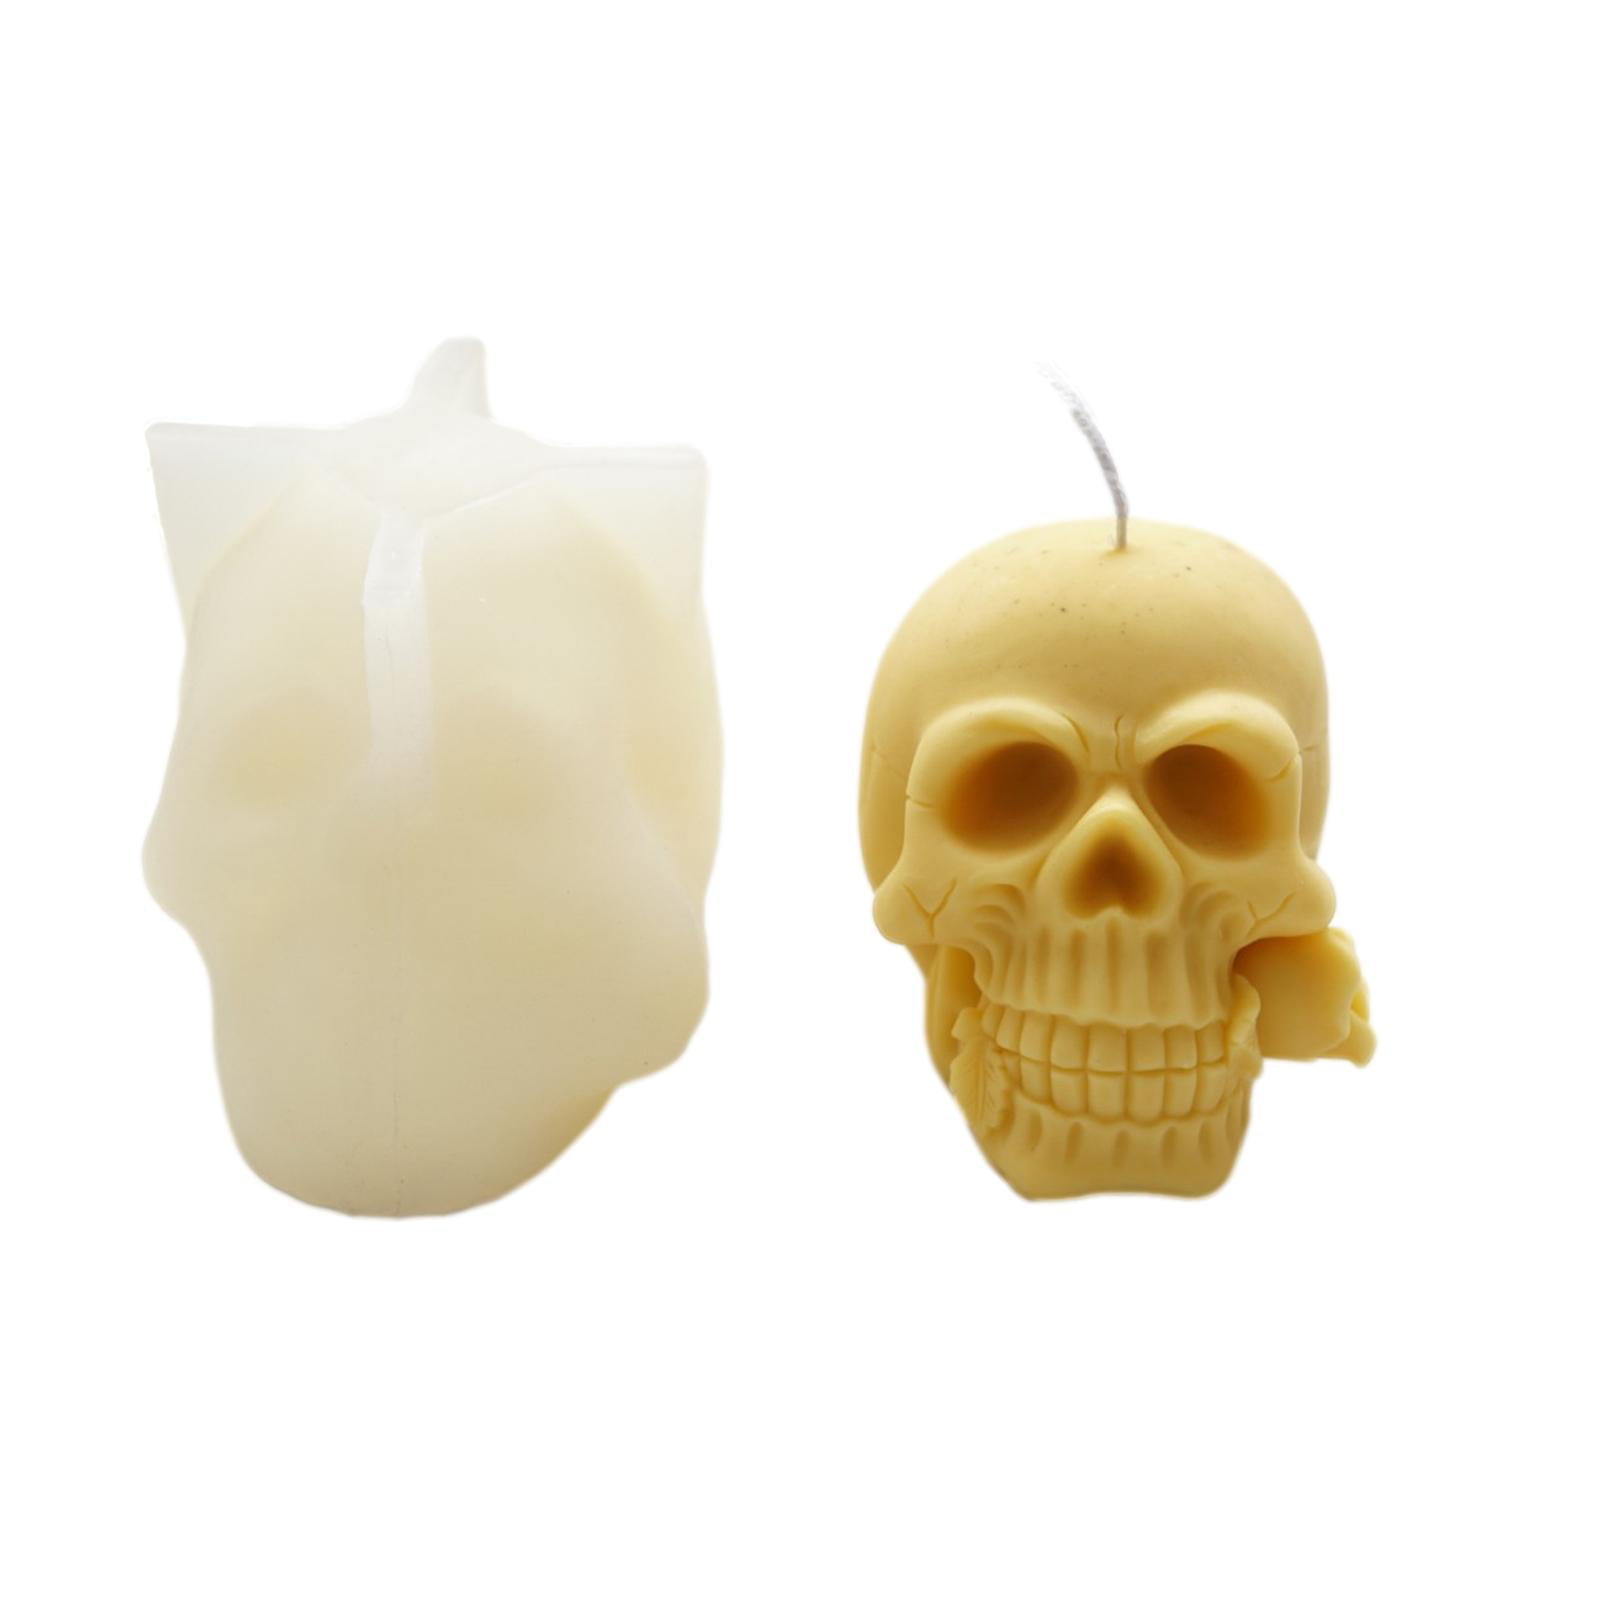 Details about   Skull Silicone Mold Making Candle Resin Mould Chocolate Cake Decoration Form 